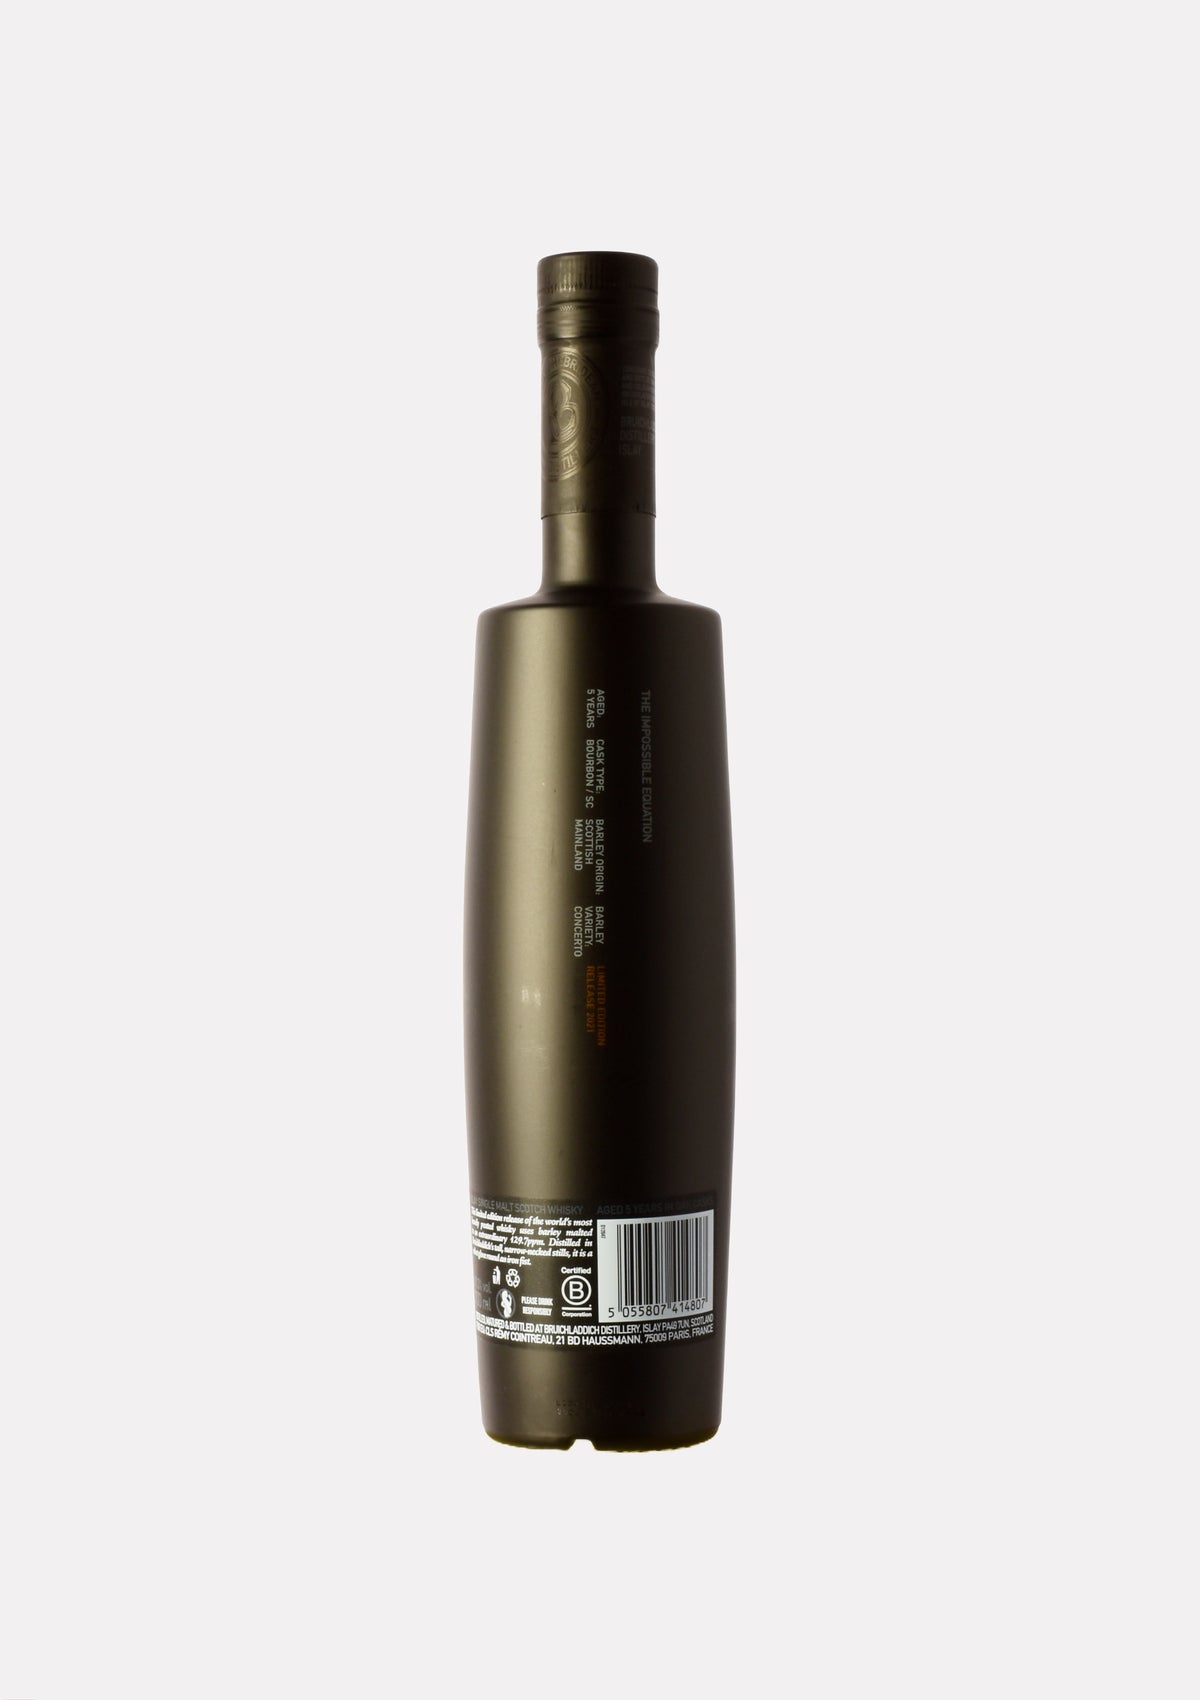 Octomore 12.2 129.7 ppm